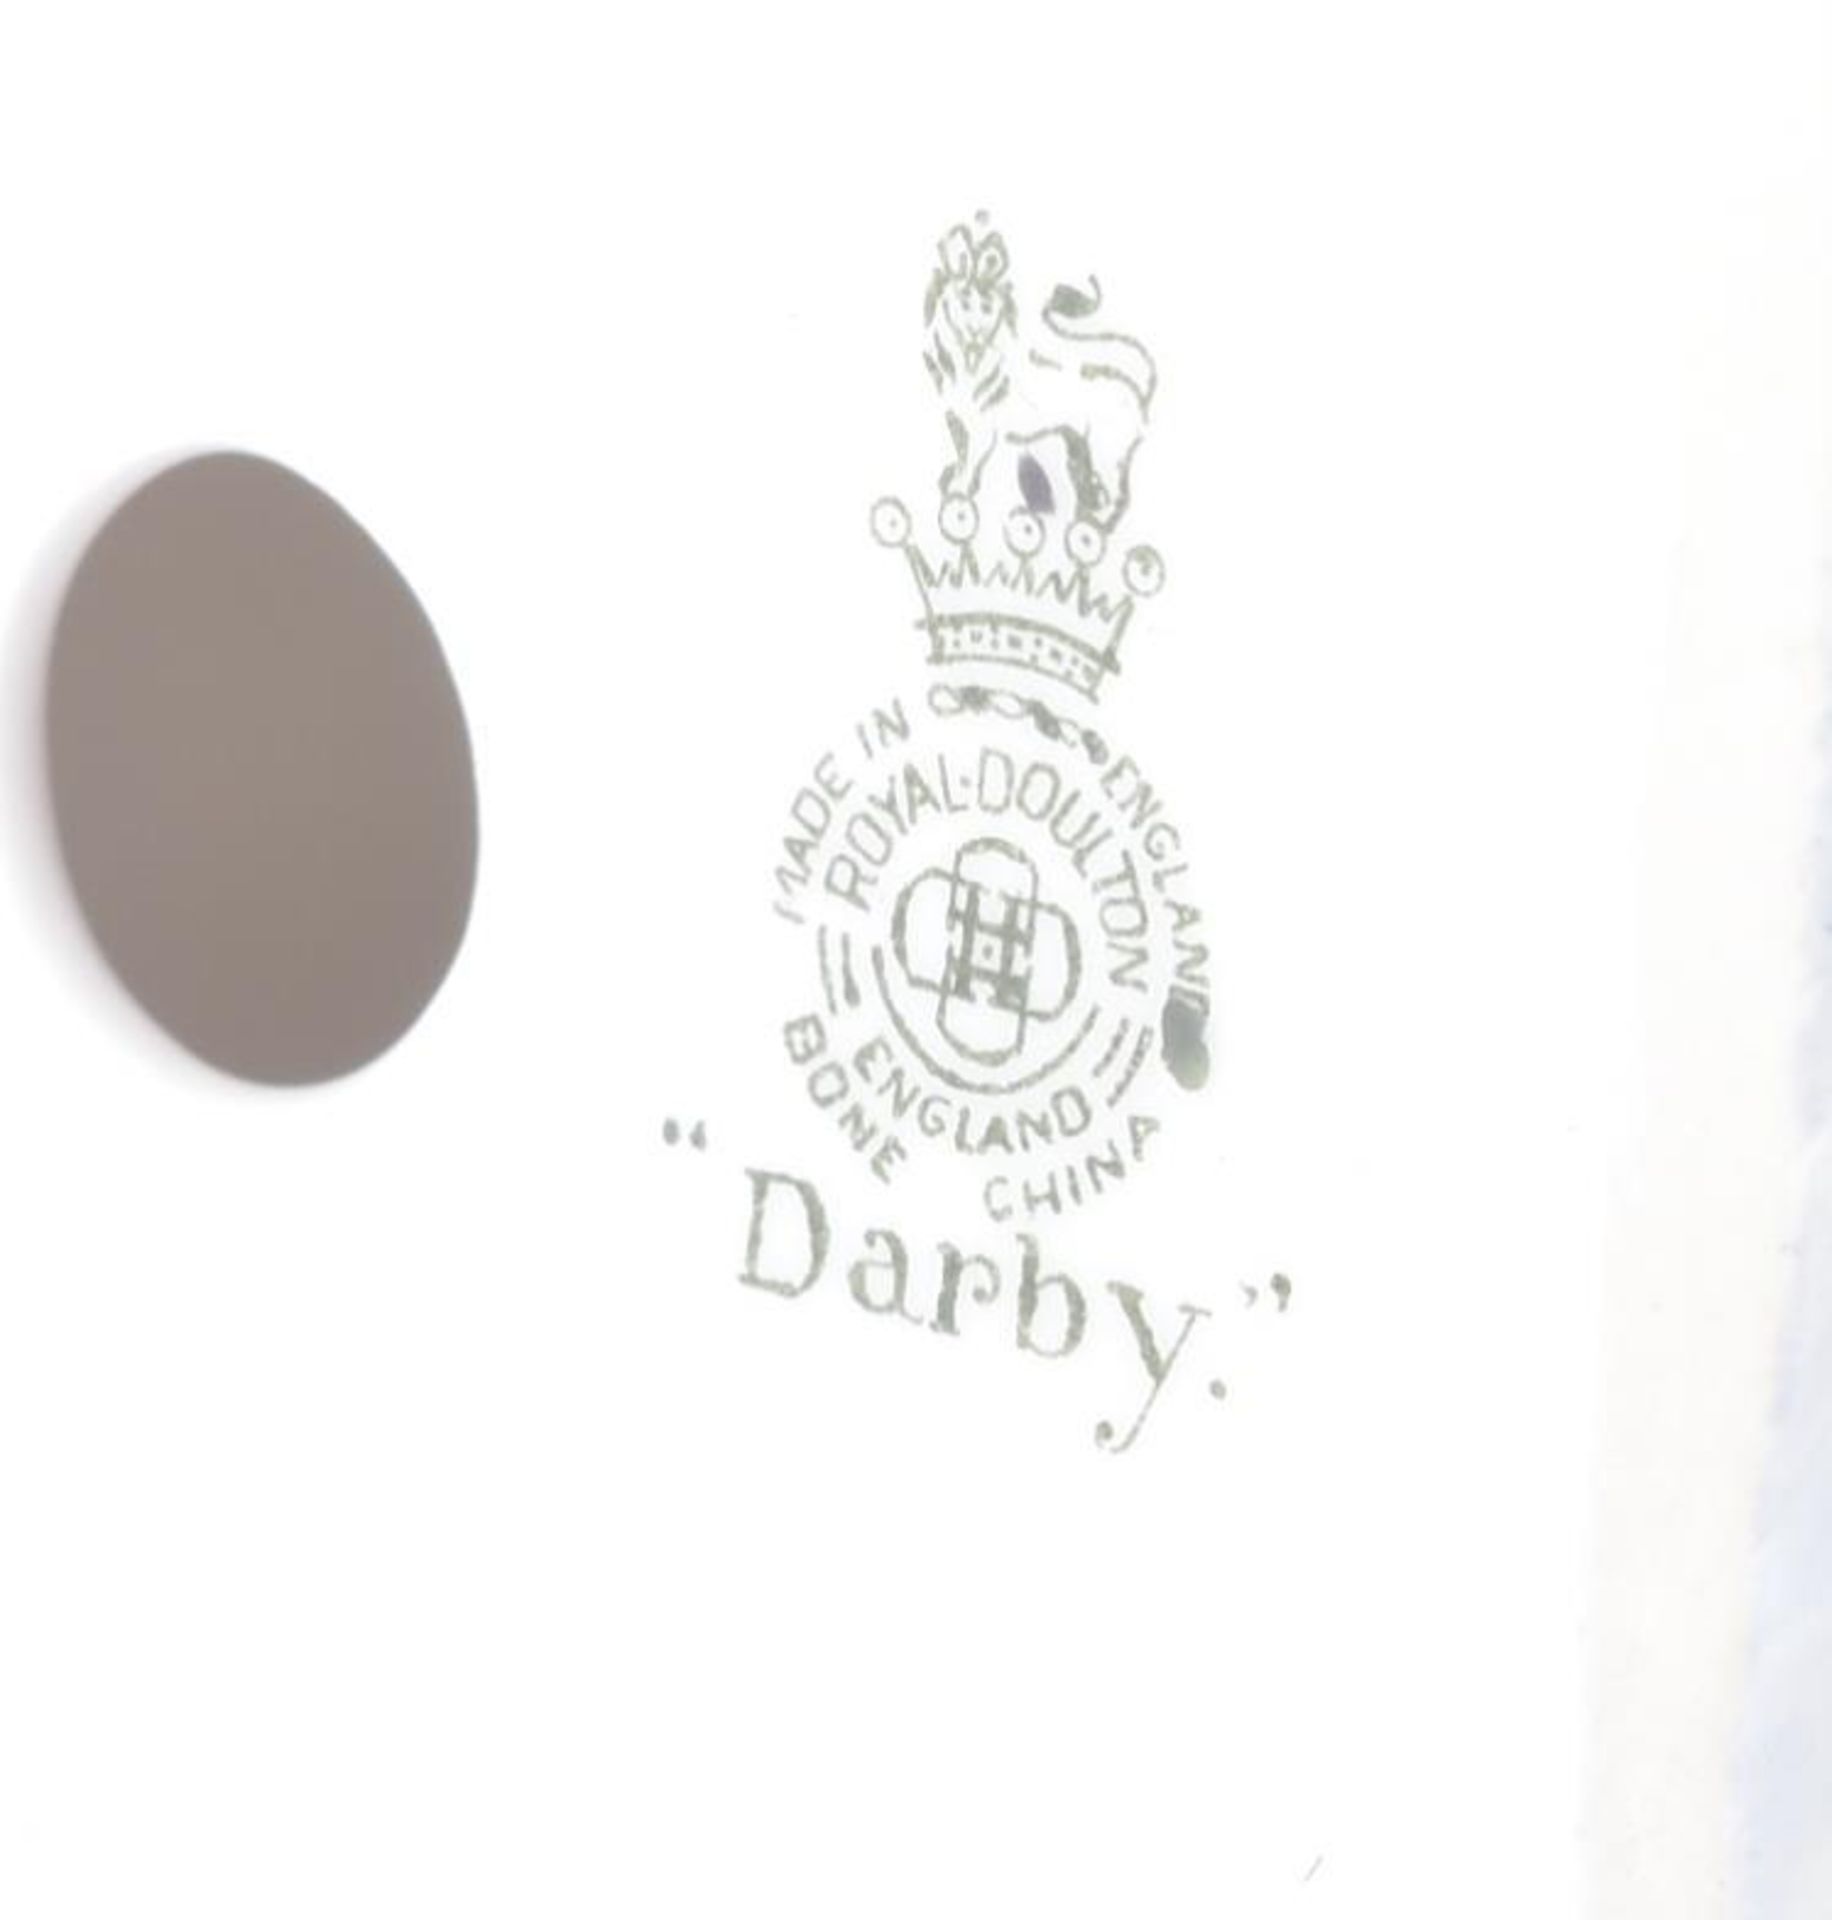 ROYAL DOULTON – DARBY - FROM A PRIVATE COLLECTION - Image 4 of 4